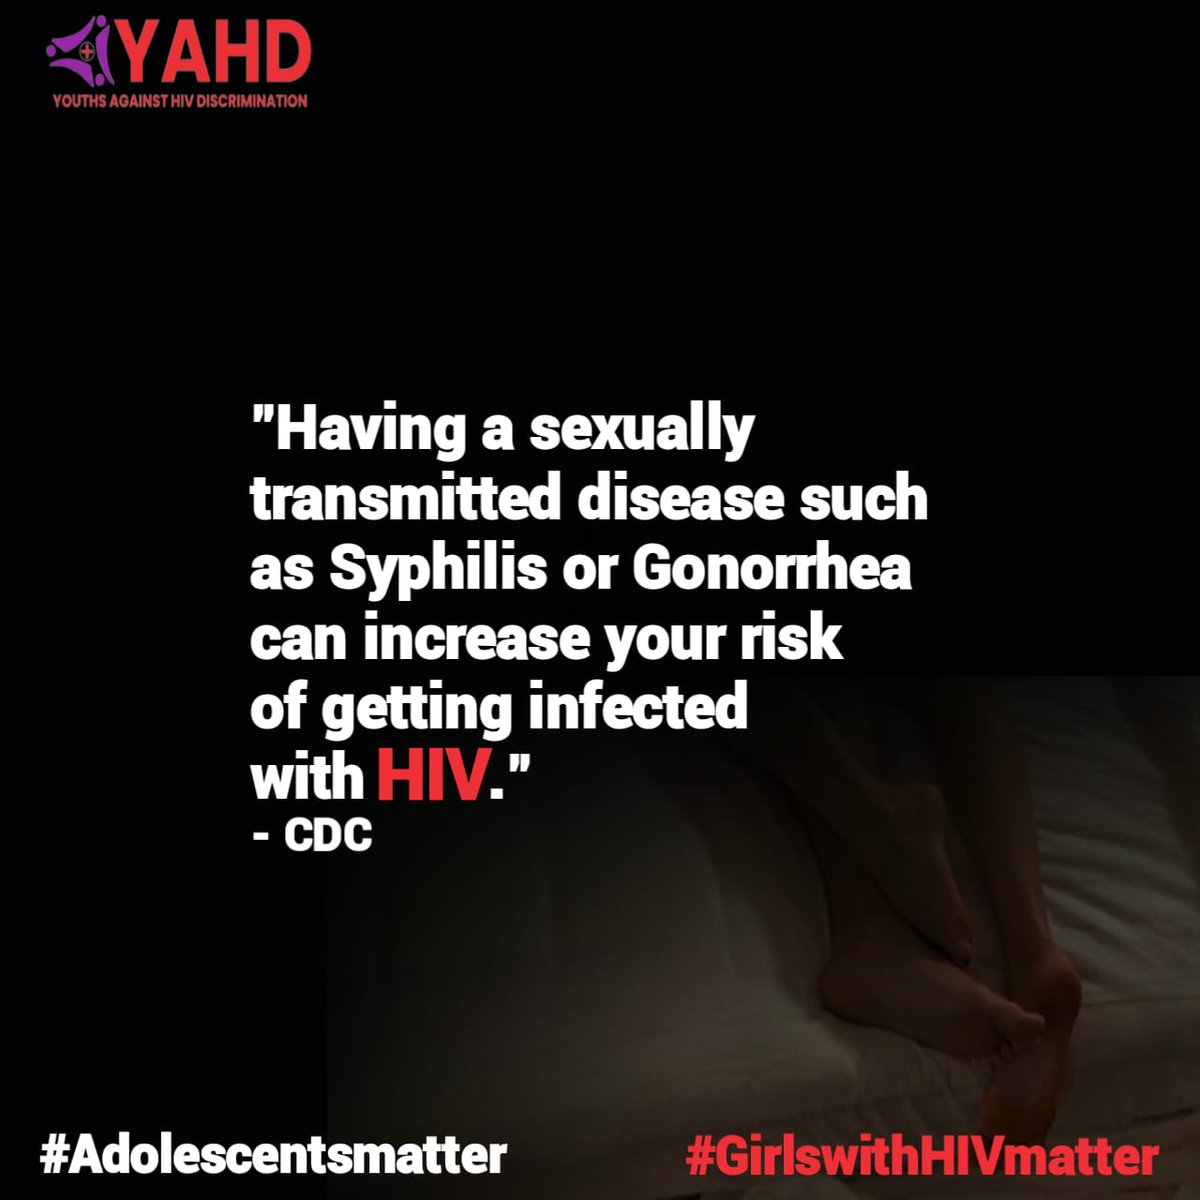 yahd_ng: #DidYouKnow

You stand a higher chance of getting infected with #H...